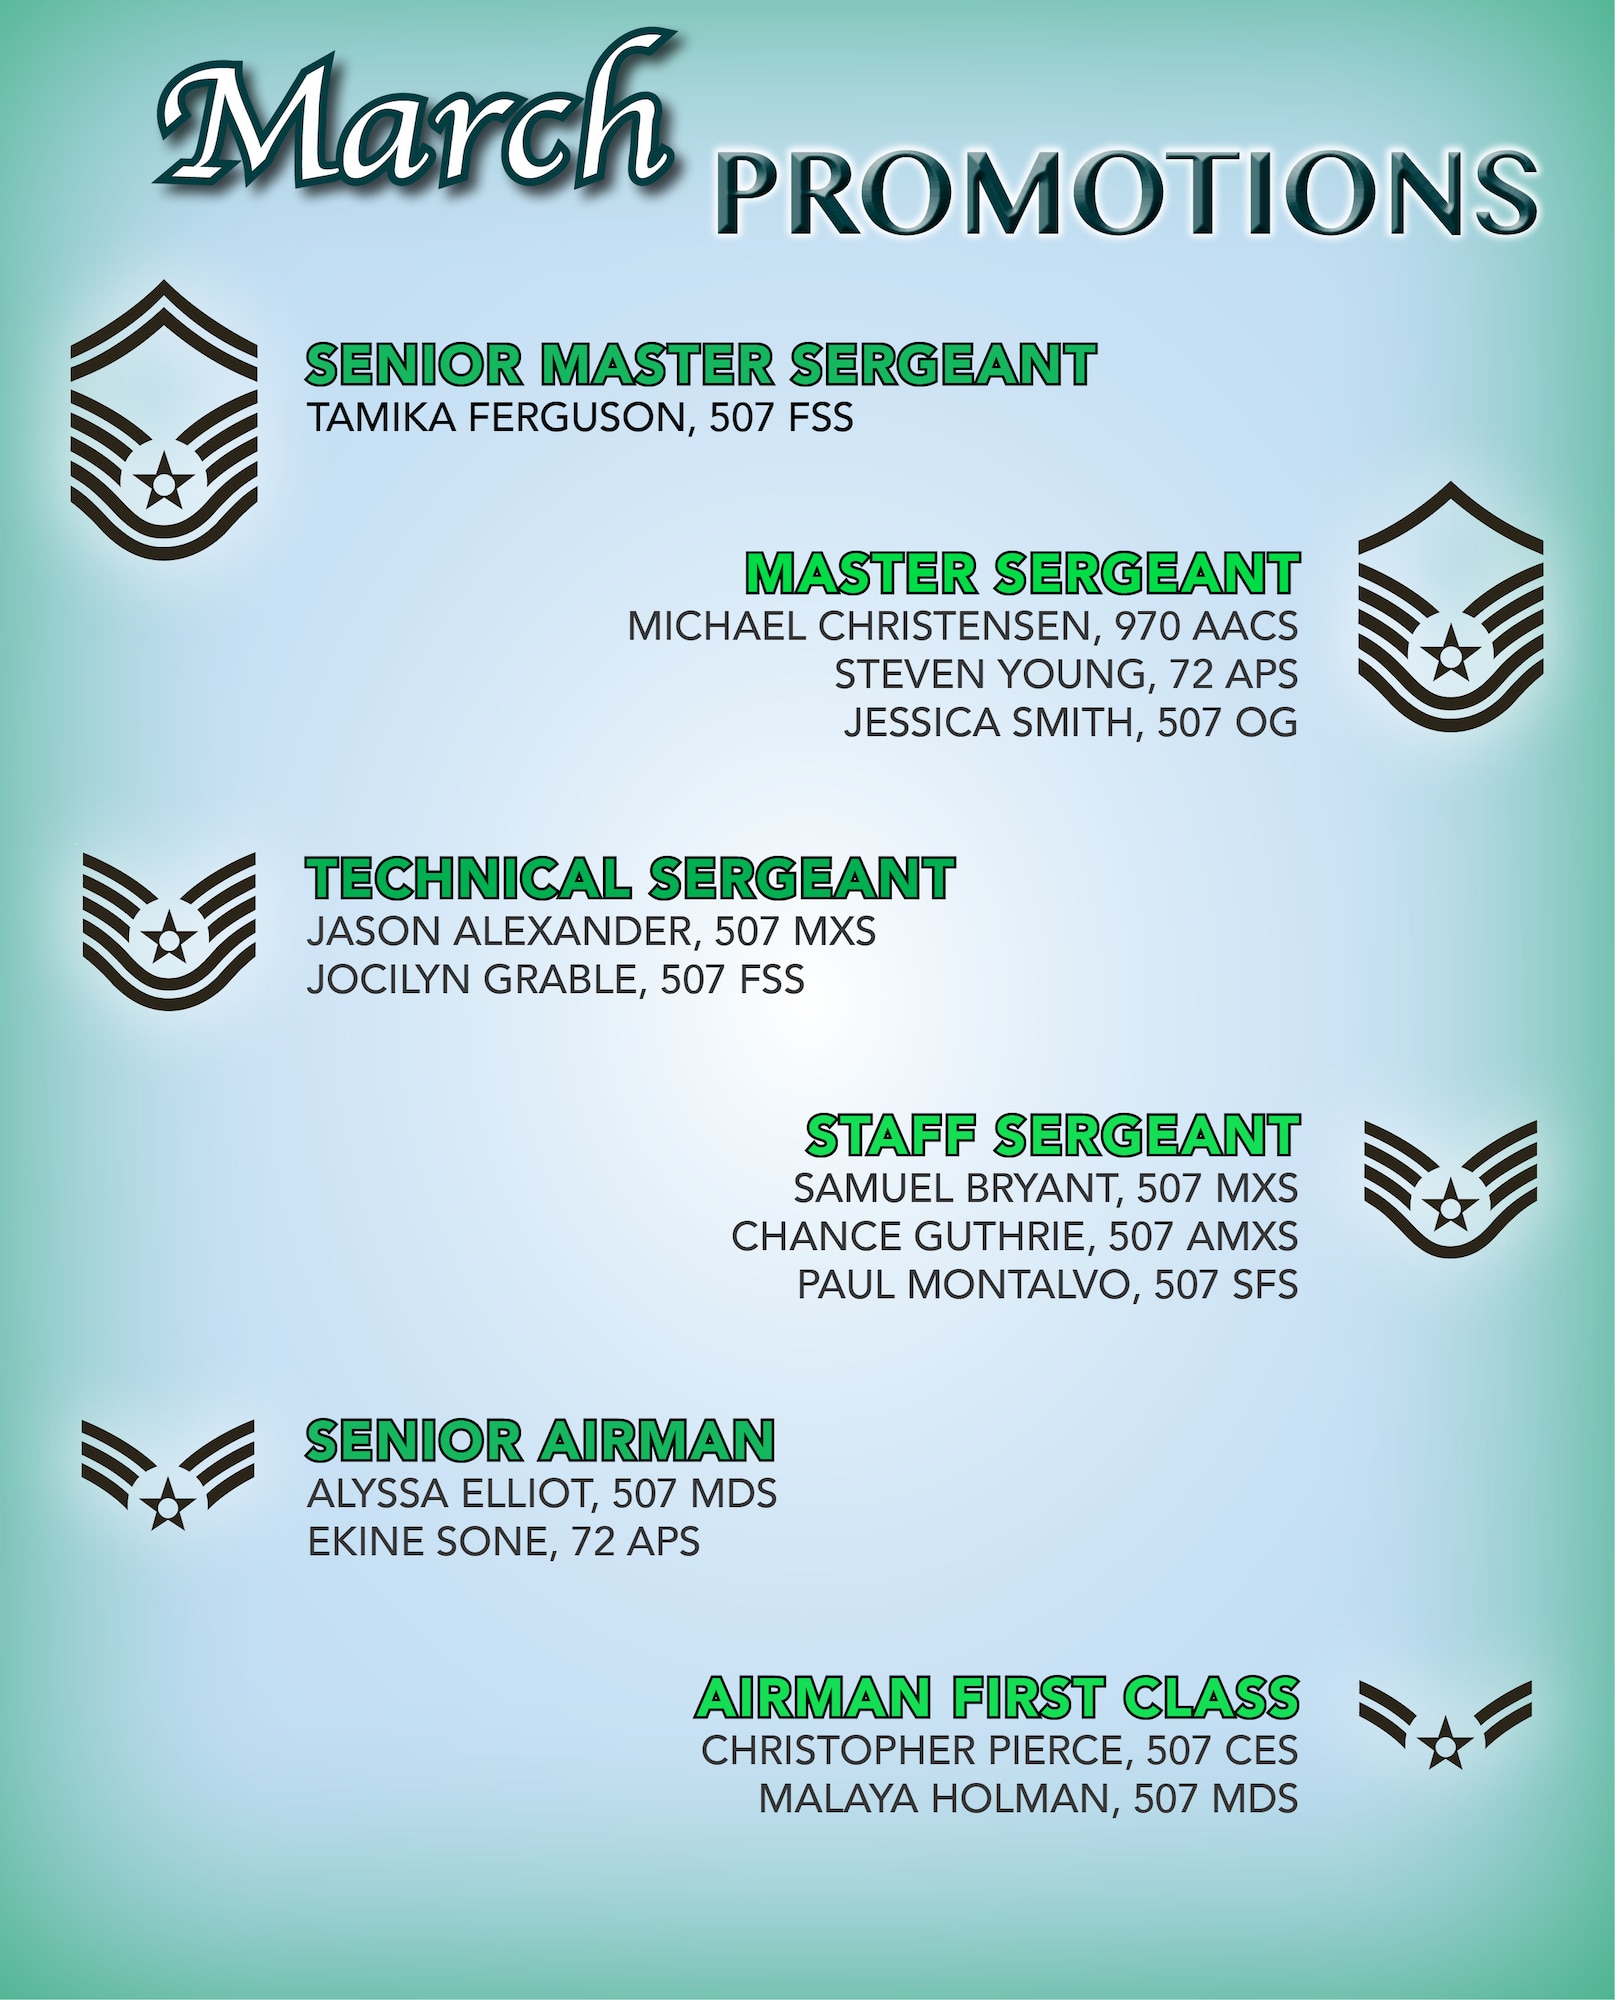 The 507th Air Refueling Wing enlisted promotion list for March 2019 at Tinker Air Force Base, Oklahoma. (U.S. Air Force image by Tech. Sgt. Samantha Mathison)